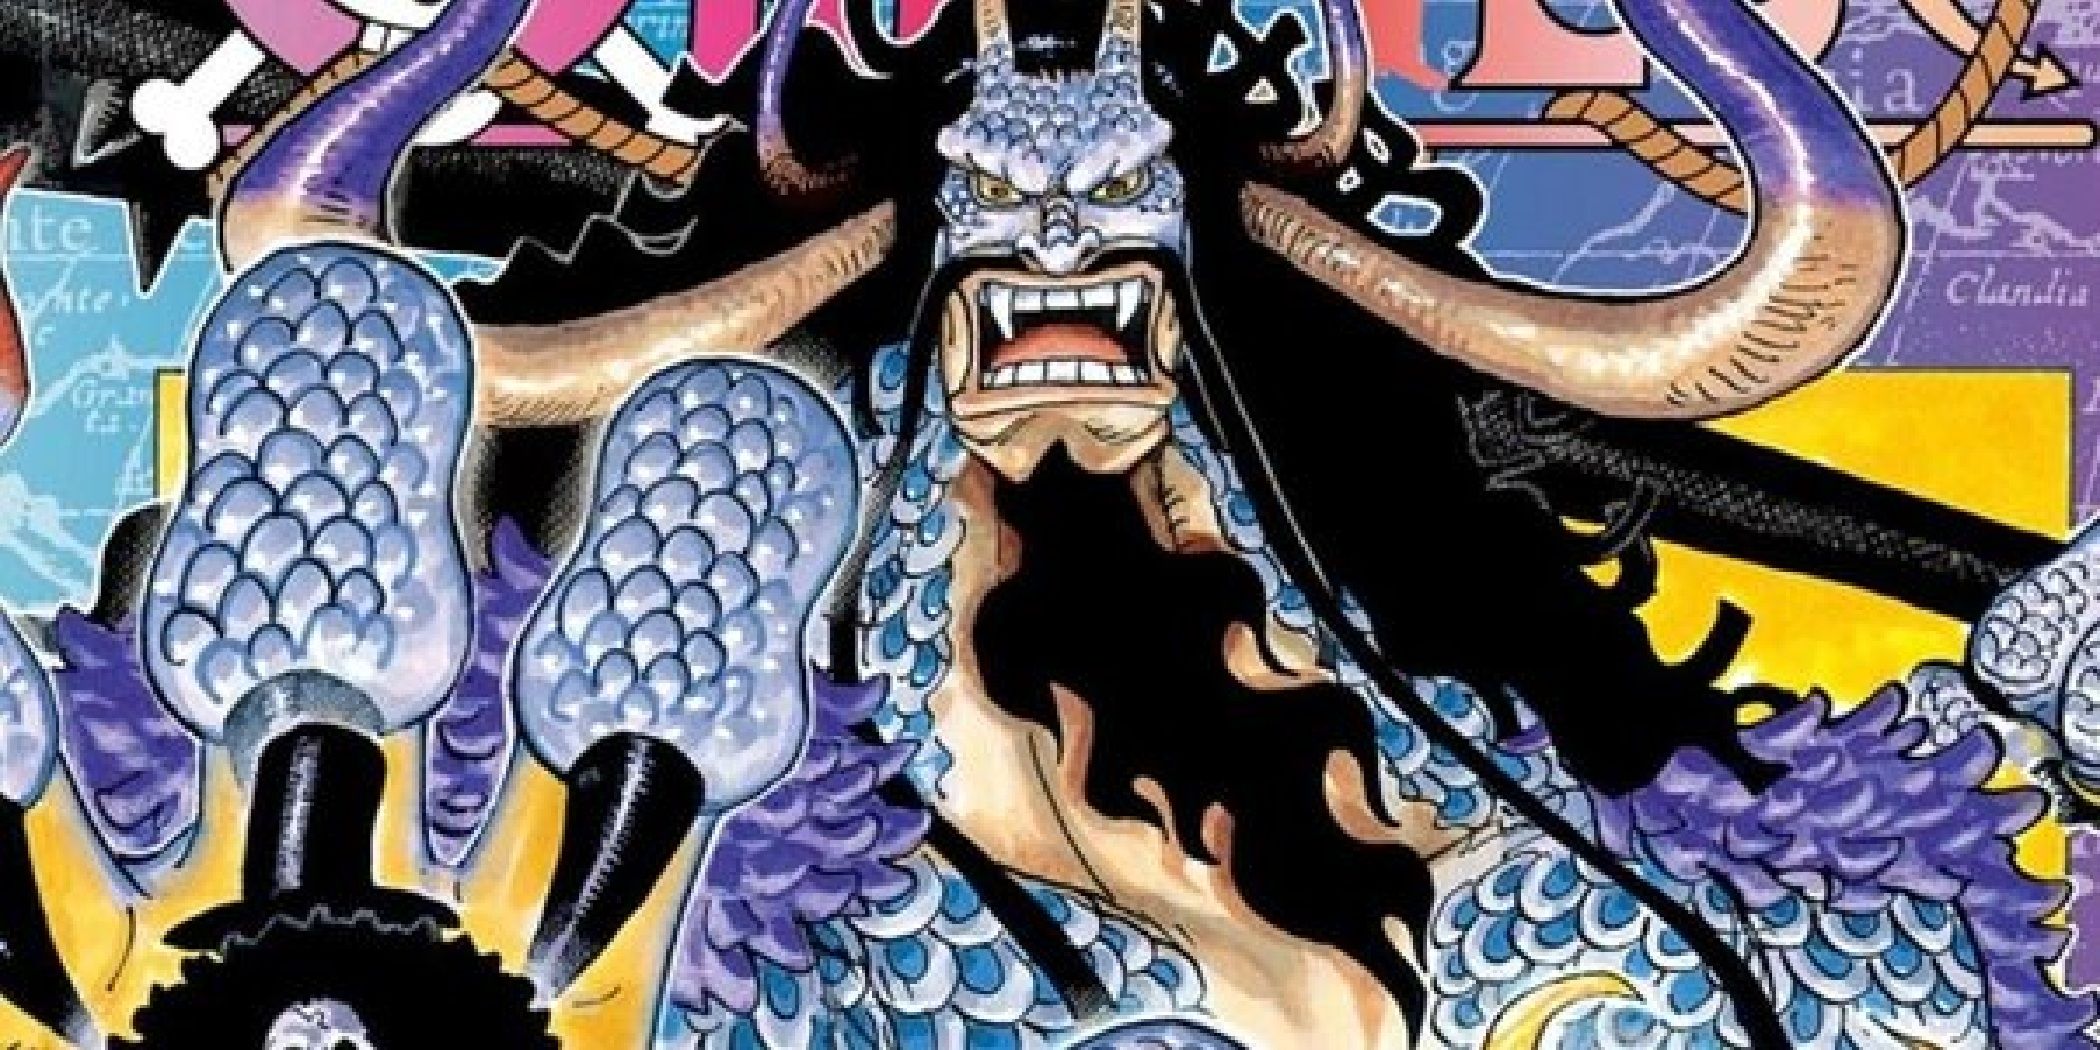 Kaido from the One Piece manga as featured in official art.